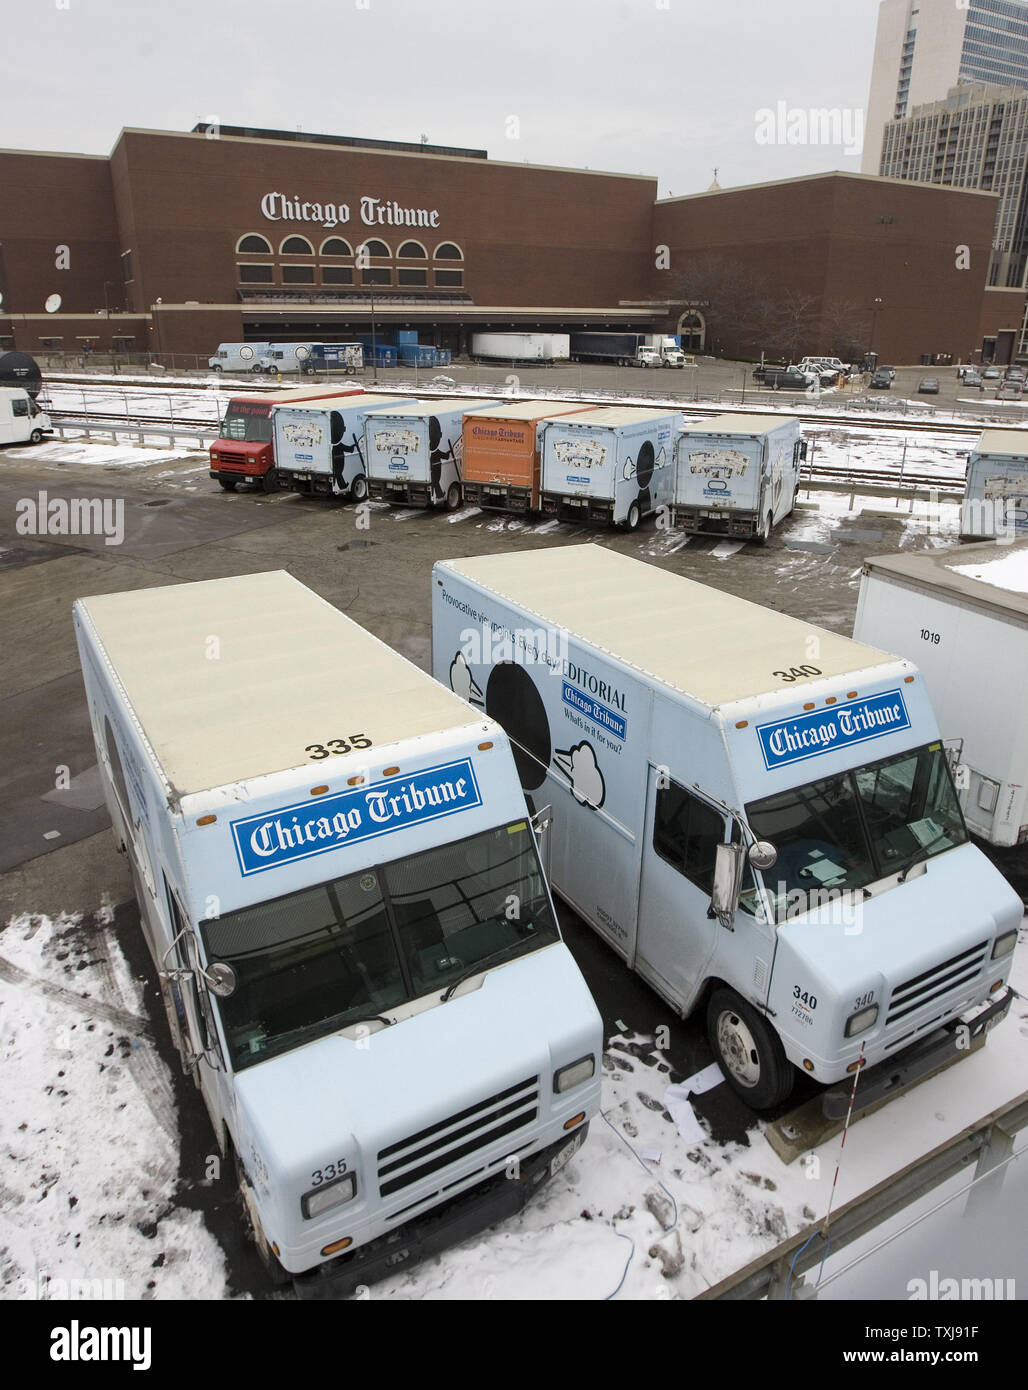 Delivery trucks sit parked in a lot in front of the Chicago Tribune's printing plant on December 8, 2008 in Chicago. The Tribune Company, which owns the Chicago Cubs baseball franchise, as well as the Los Angeles Times, Chicago Tribune, The Sun of Baltimore, The Hartford (Conn.) Courant, six other daily newspapers and 23 television stations, filed for bankruptcy protection Monday in a Delaware court. (UPI Photo/Brian Kersey) Stock Photo